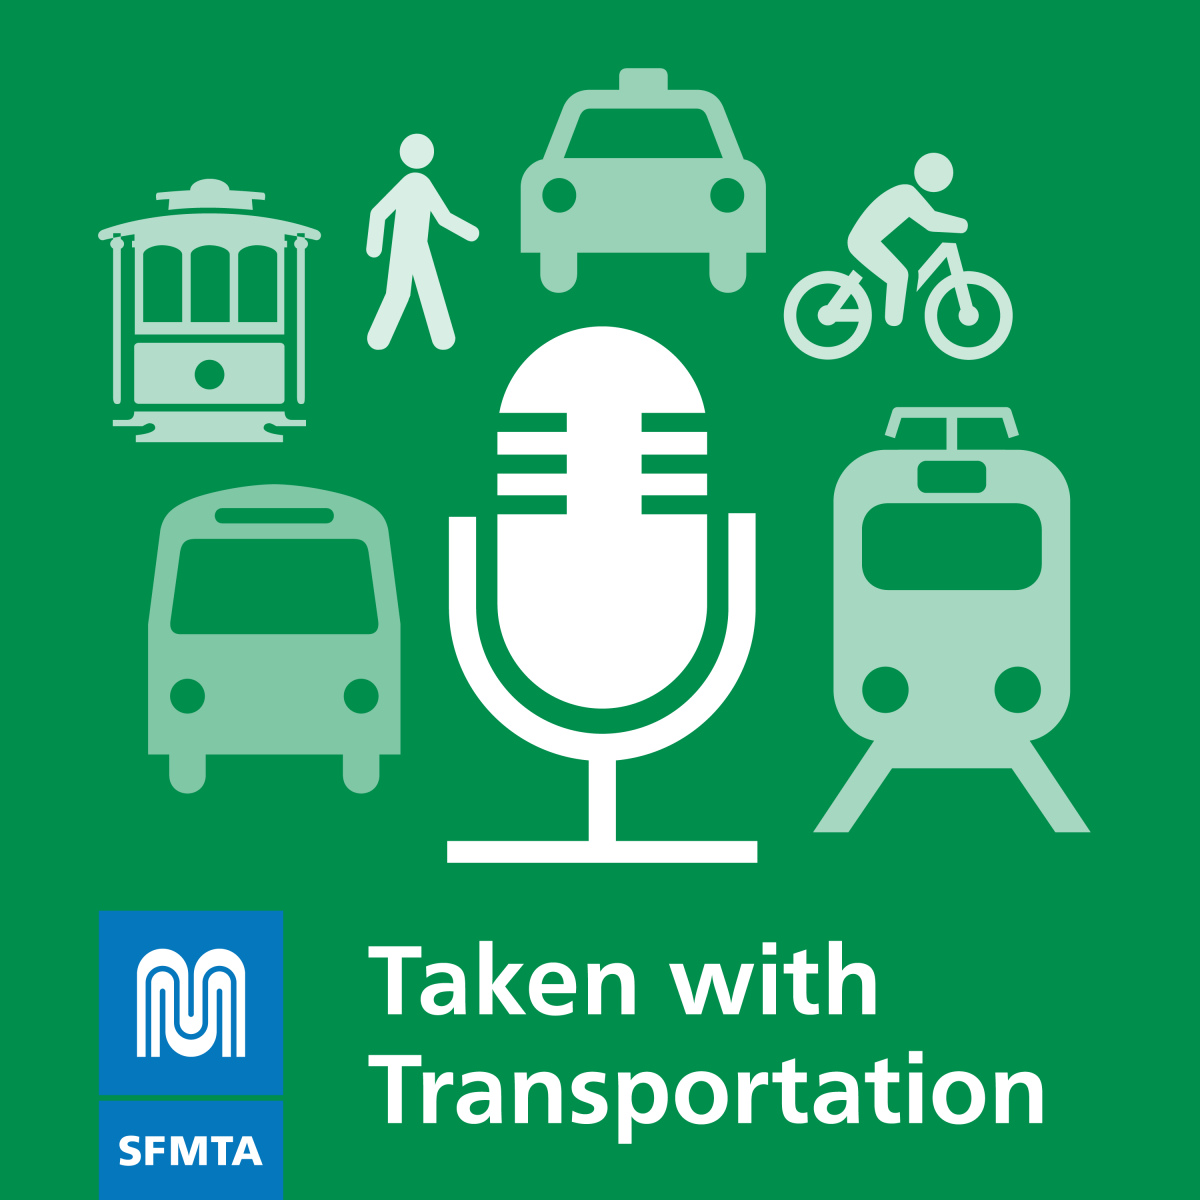 Microphone, vehicle and walker illustrations against a green background with SFMTA logo.